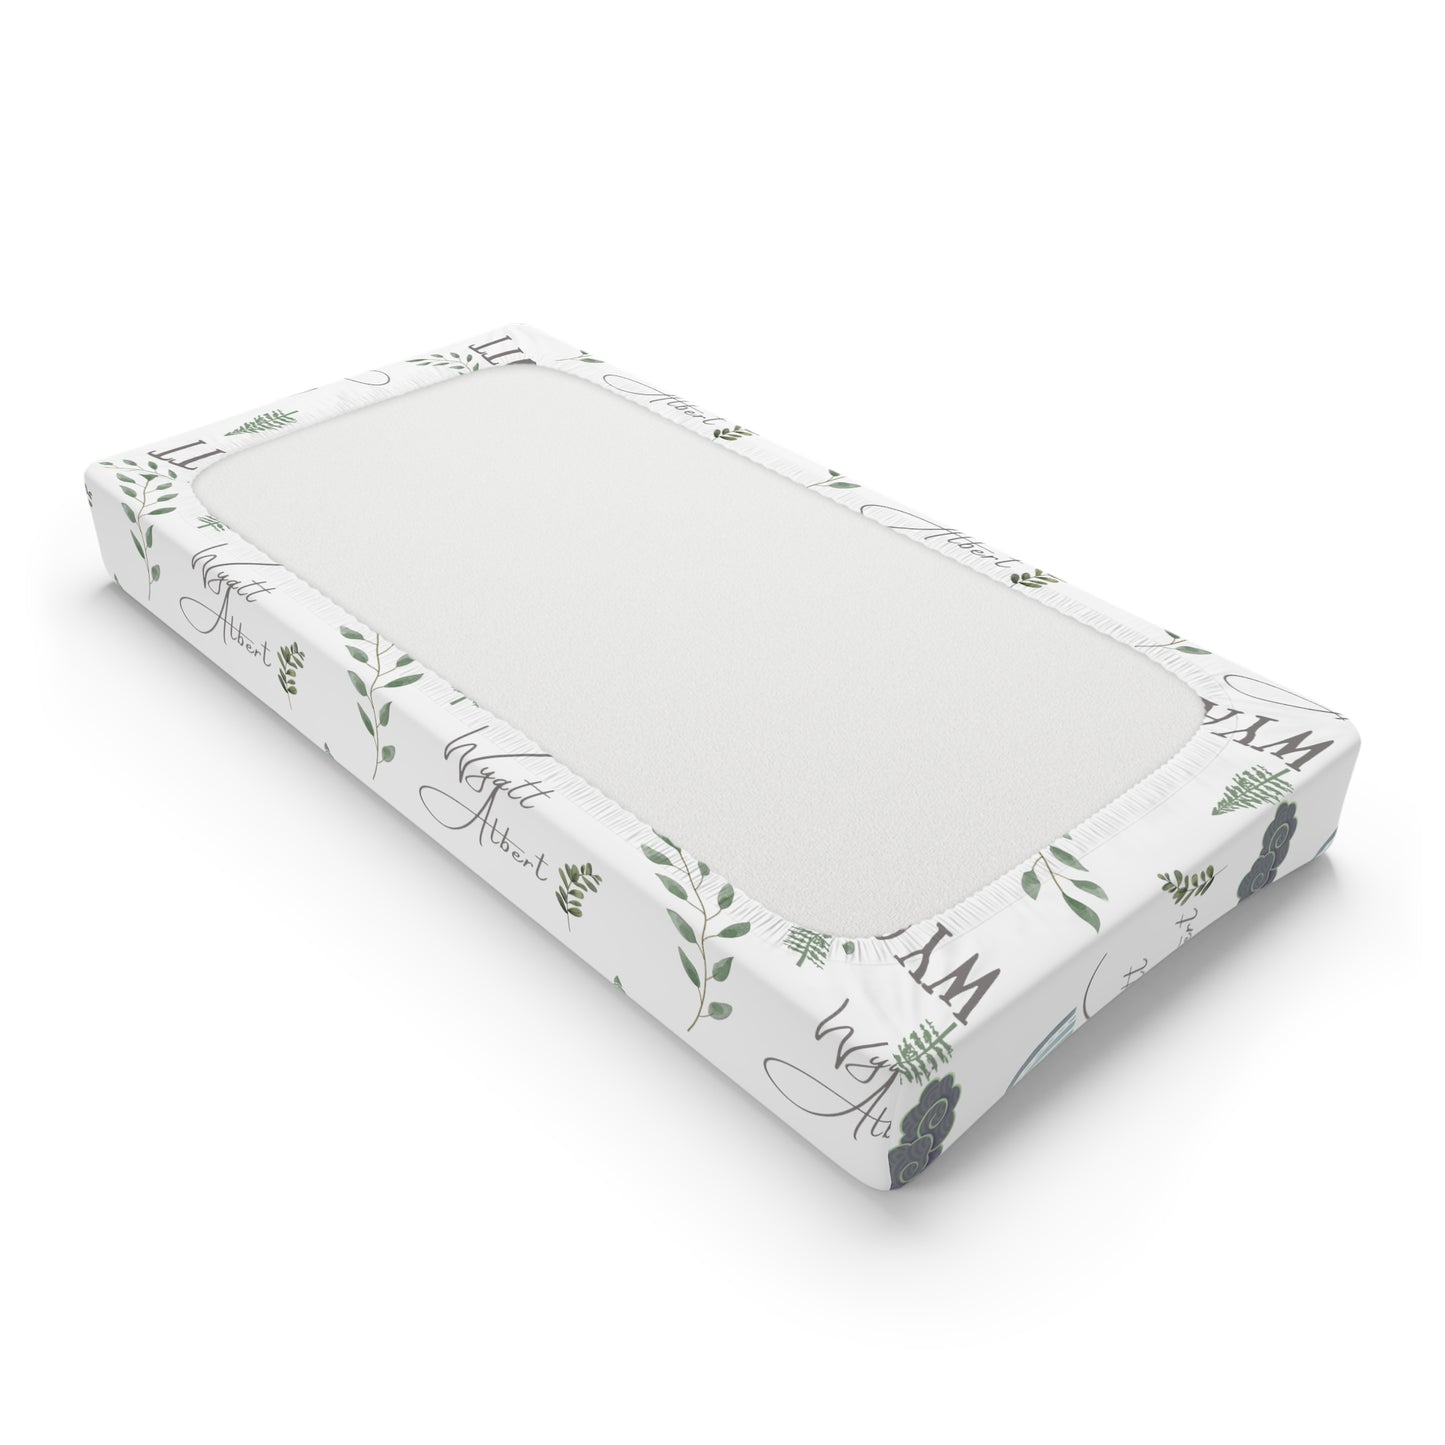 Customized Name Baby Changing Pad Cover | sage green | nature theme